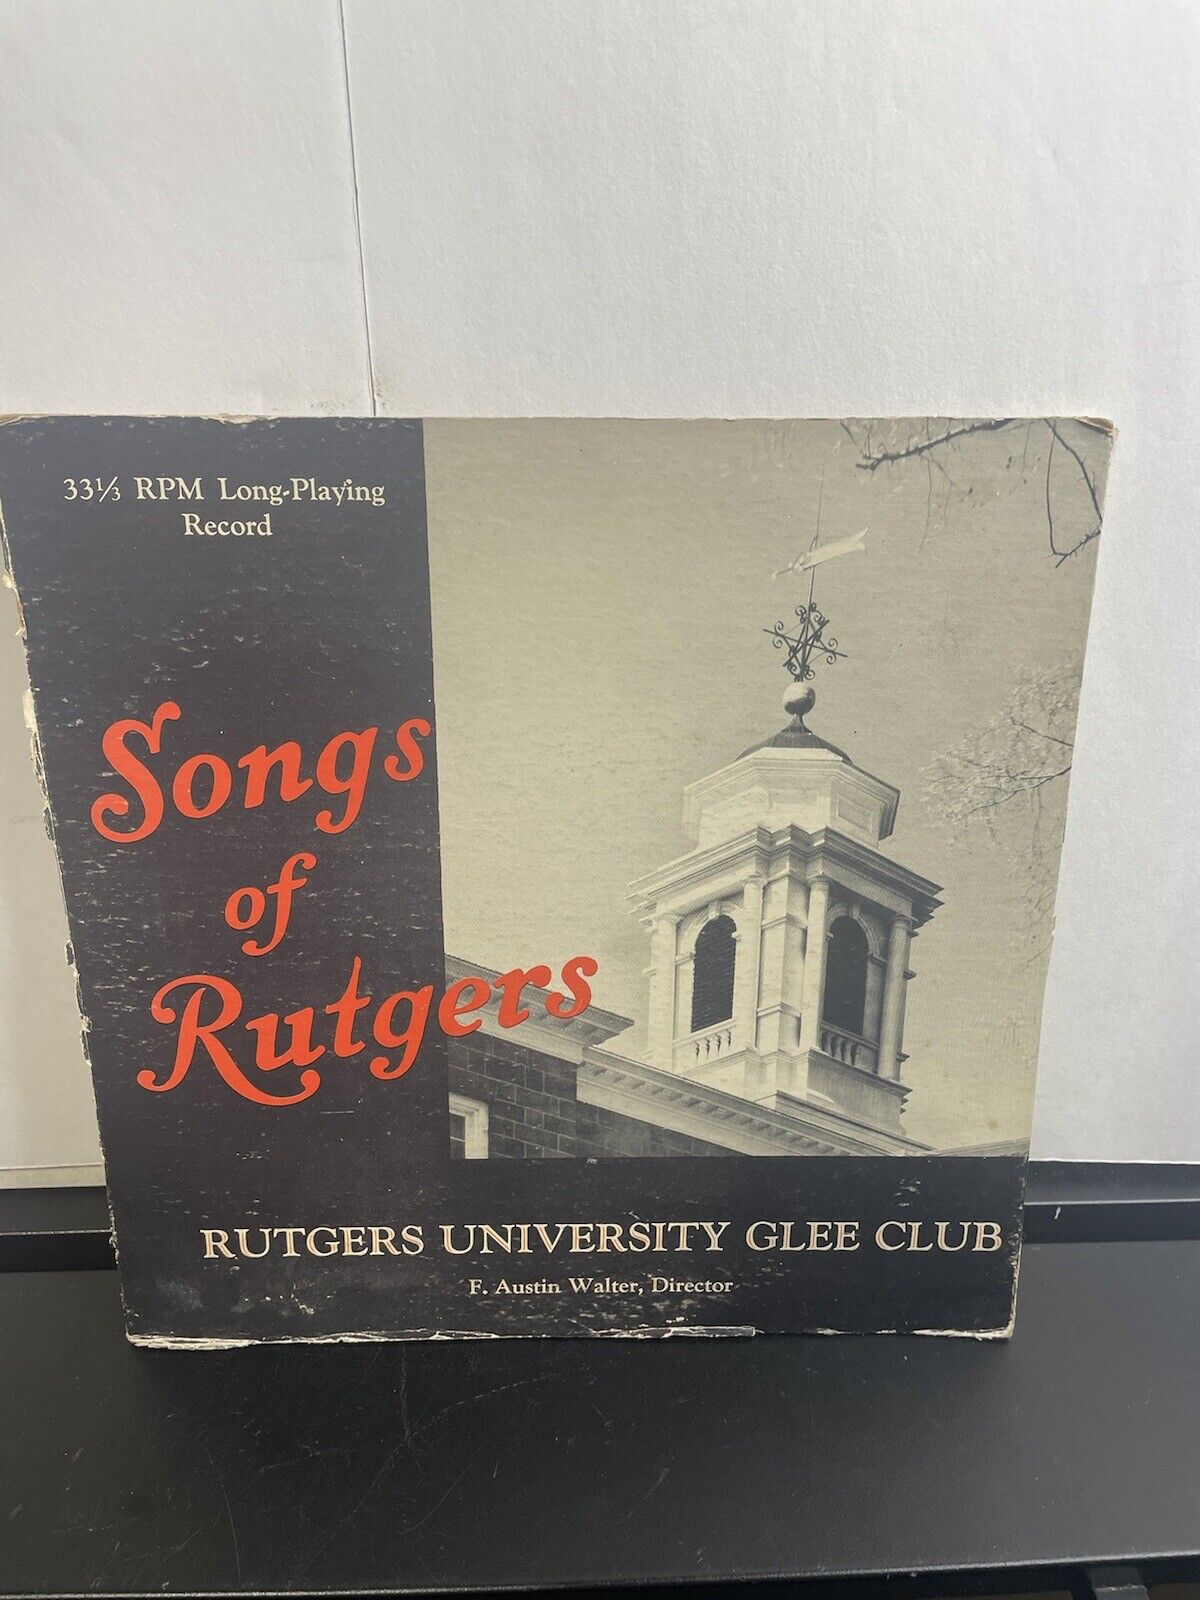 Rare Early Songs of Rutgers by The Rutgers University Glee Club 33 1/3 RPM